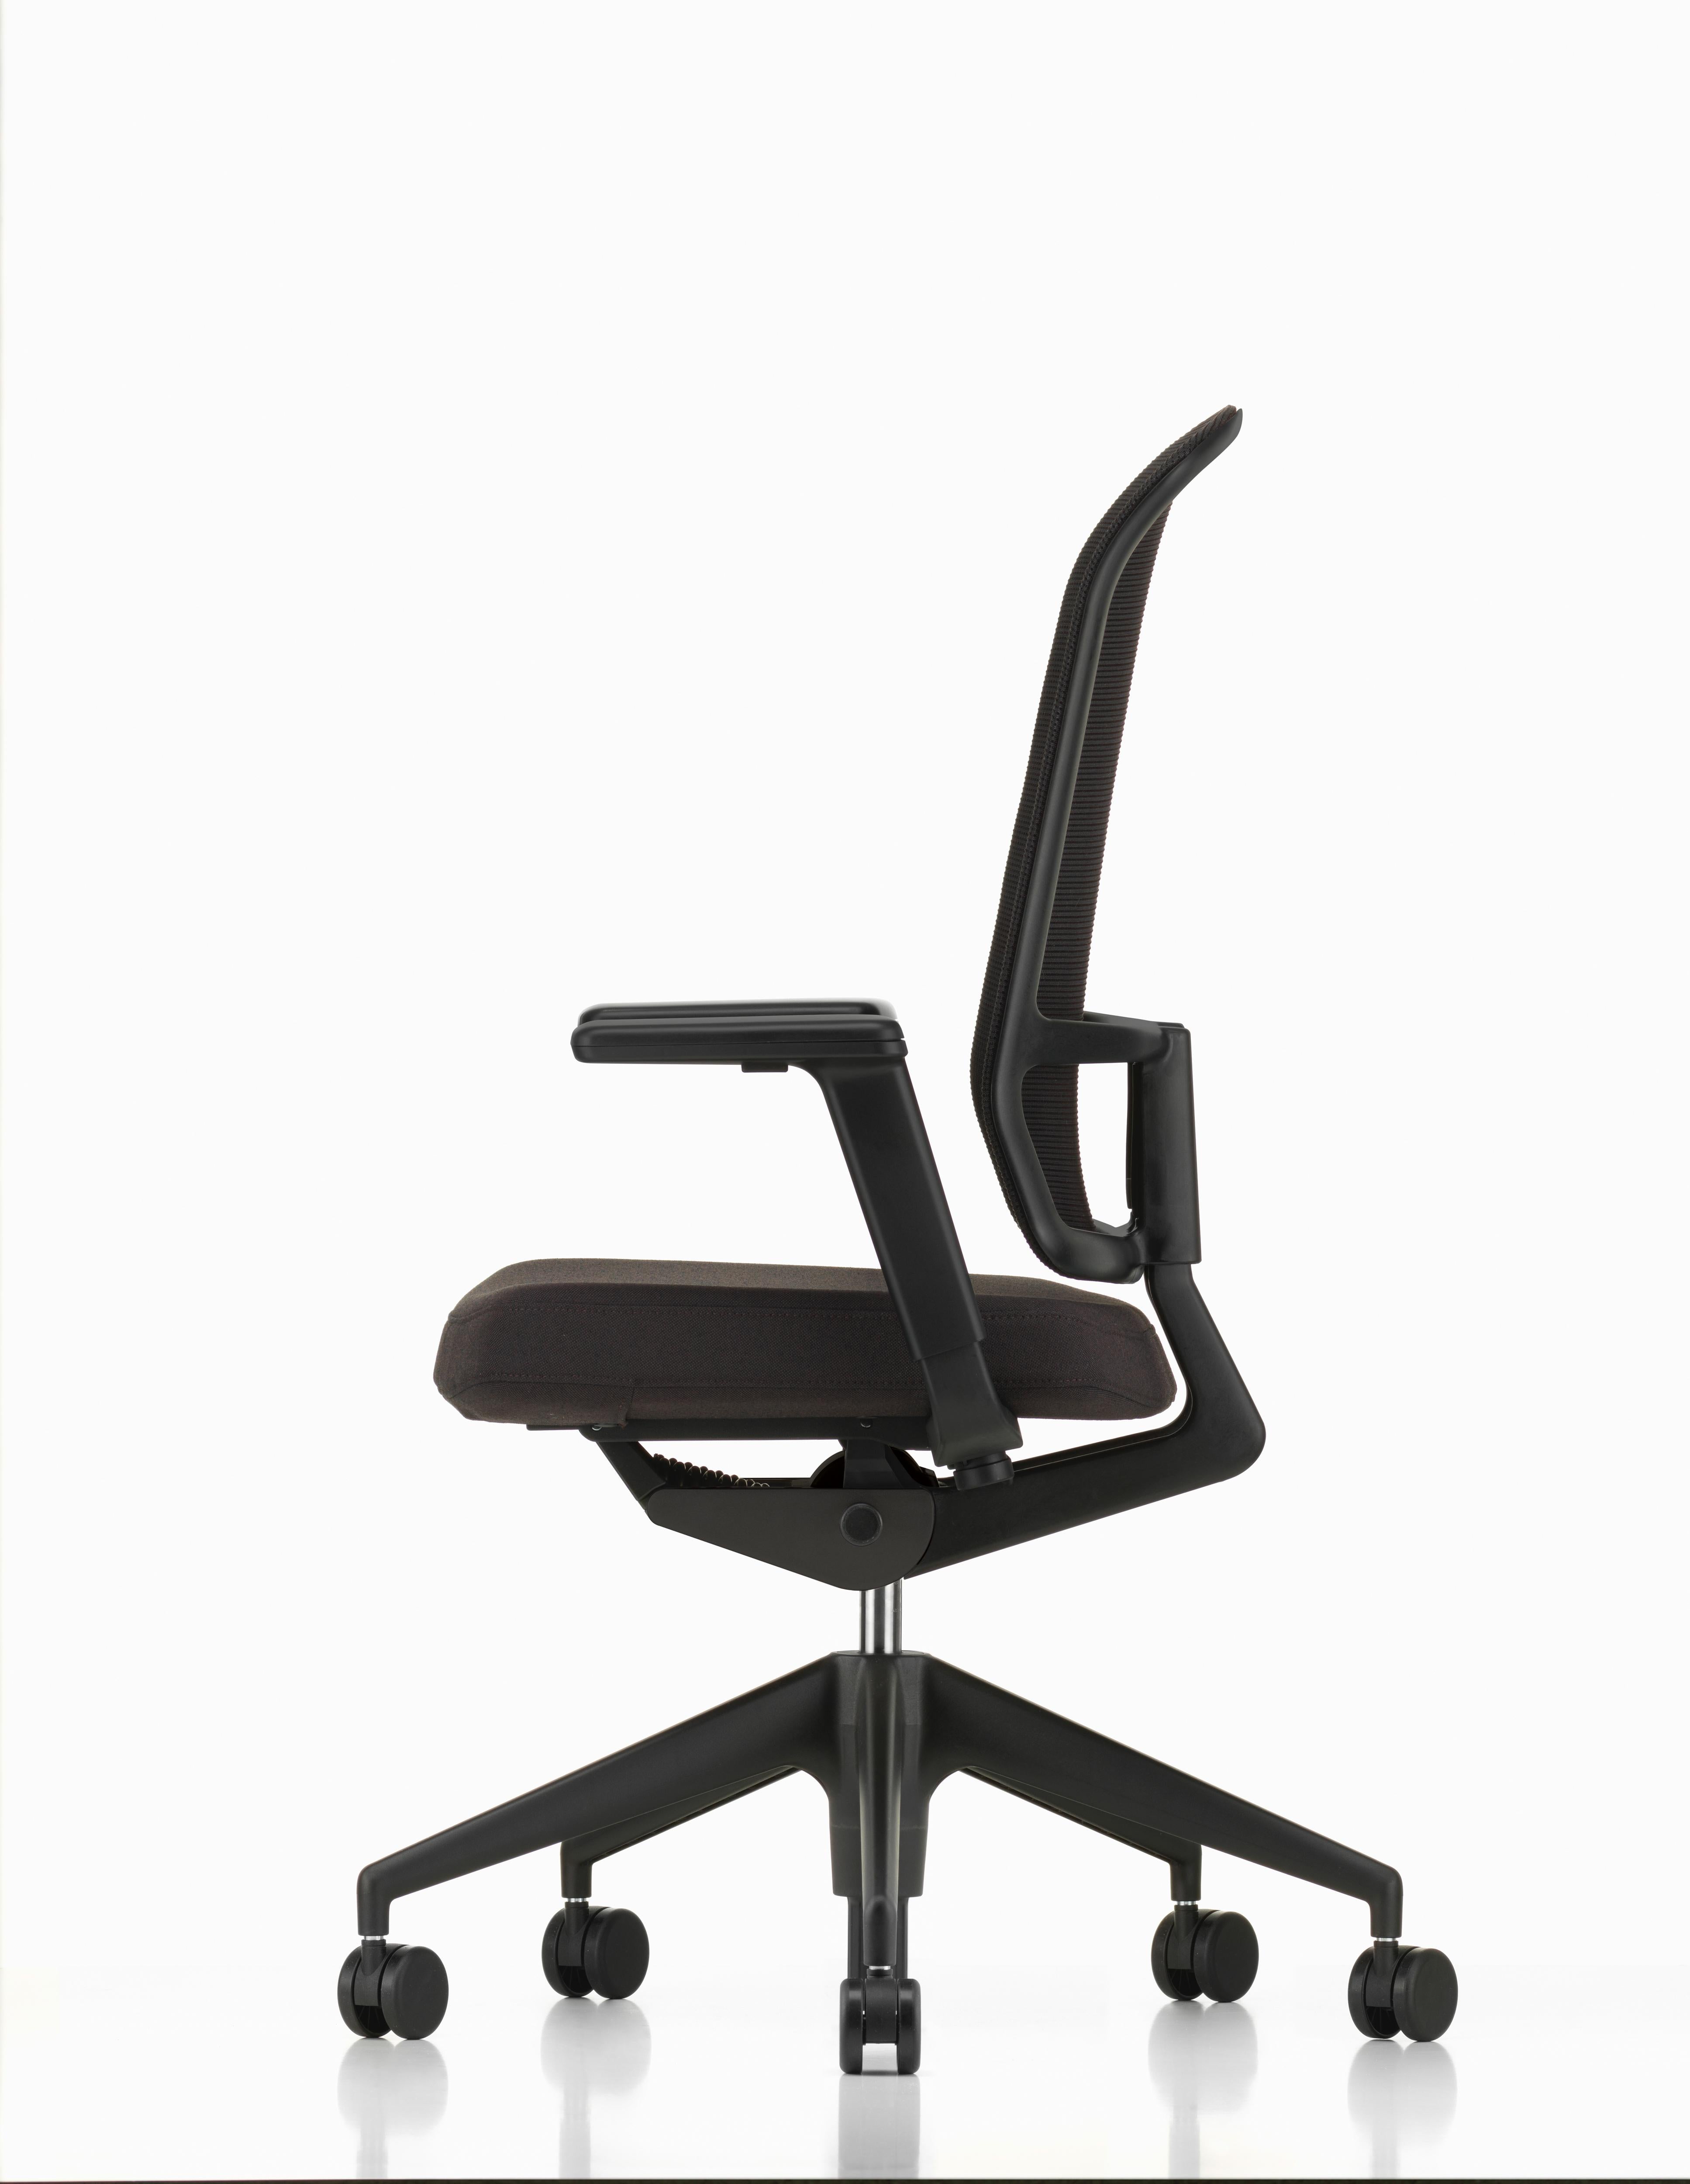 vitra am chair review